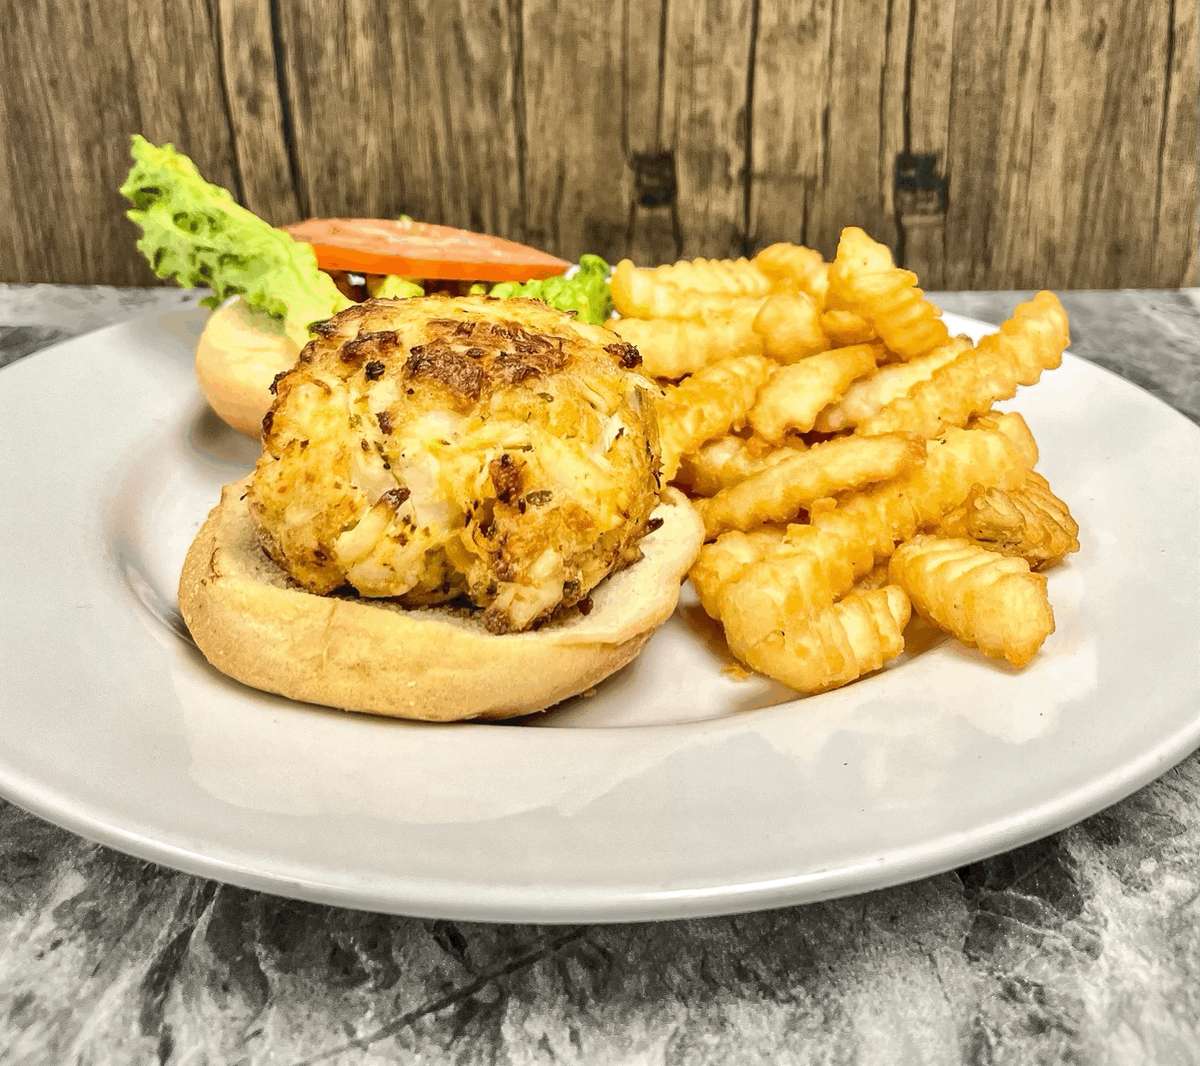 Authentic Jumbo Lump Maryland Crab Cakes : The REAL Deal